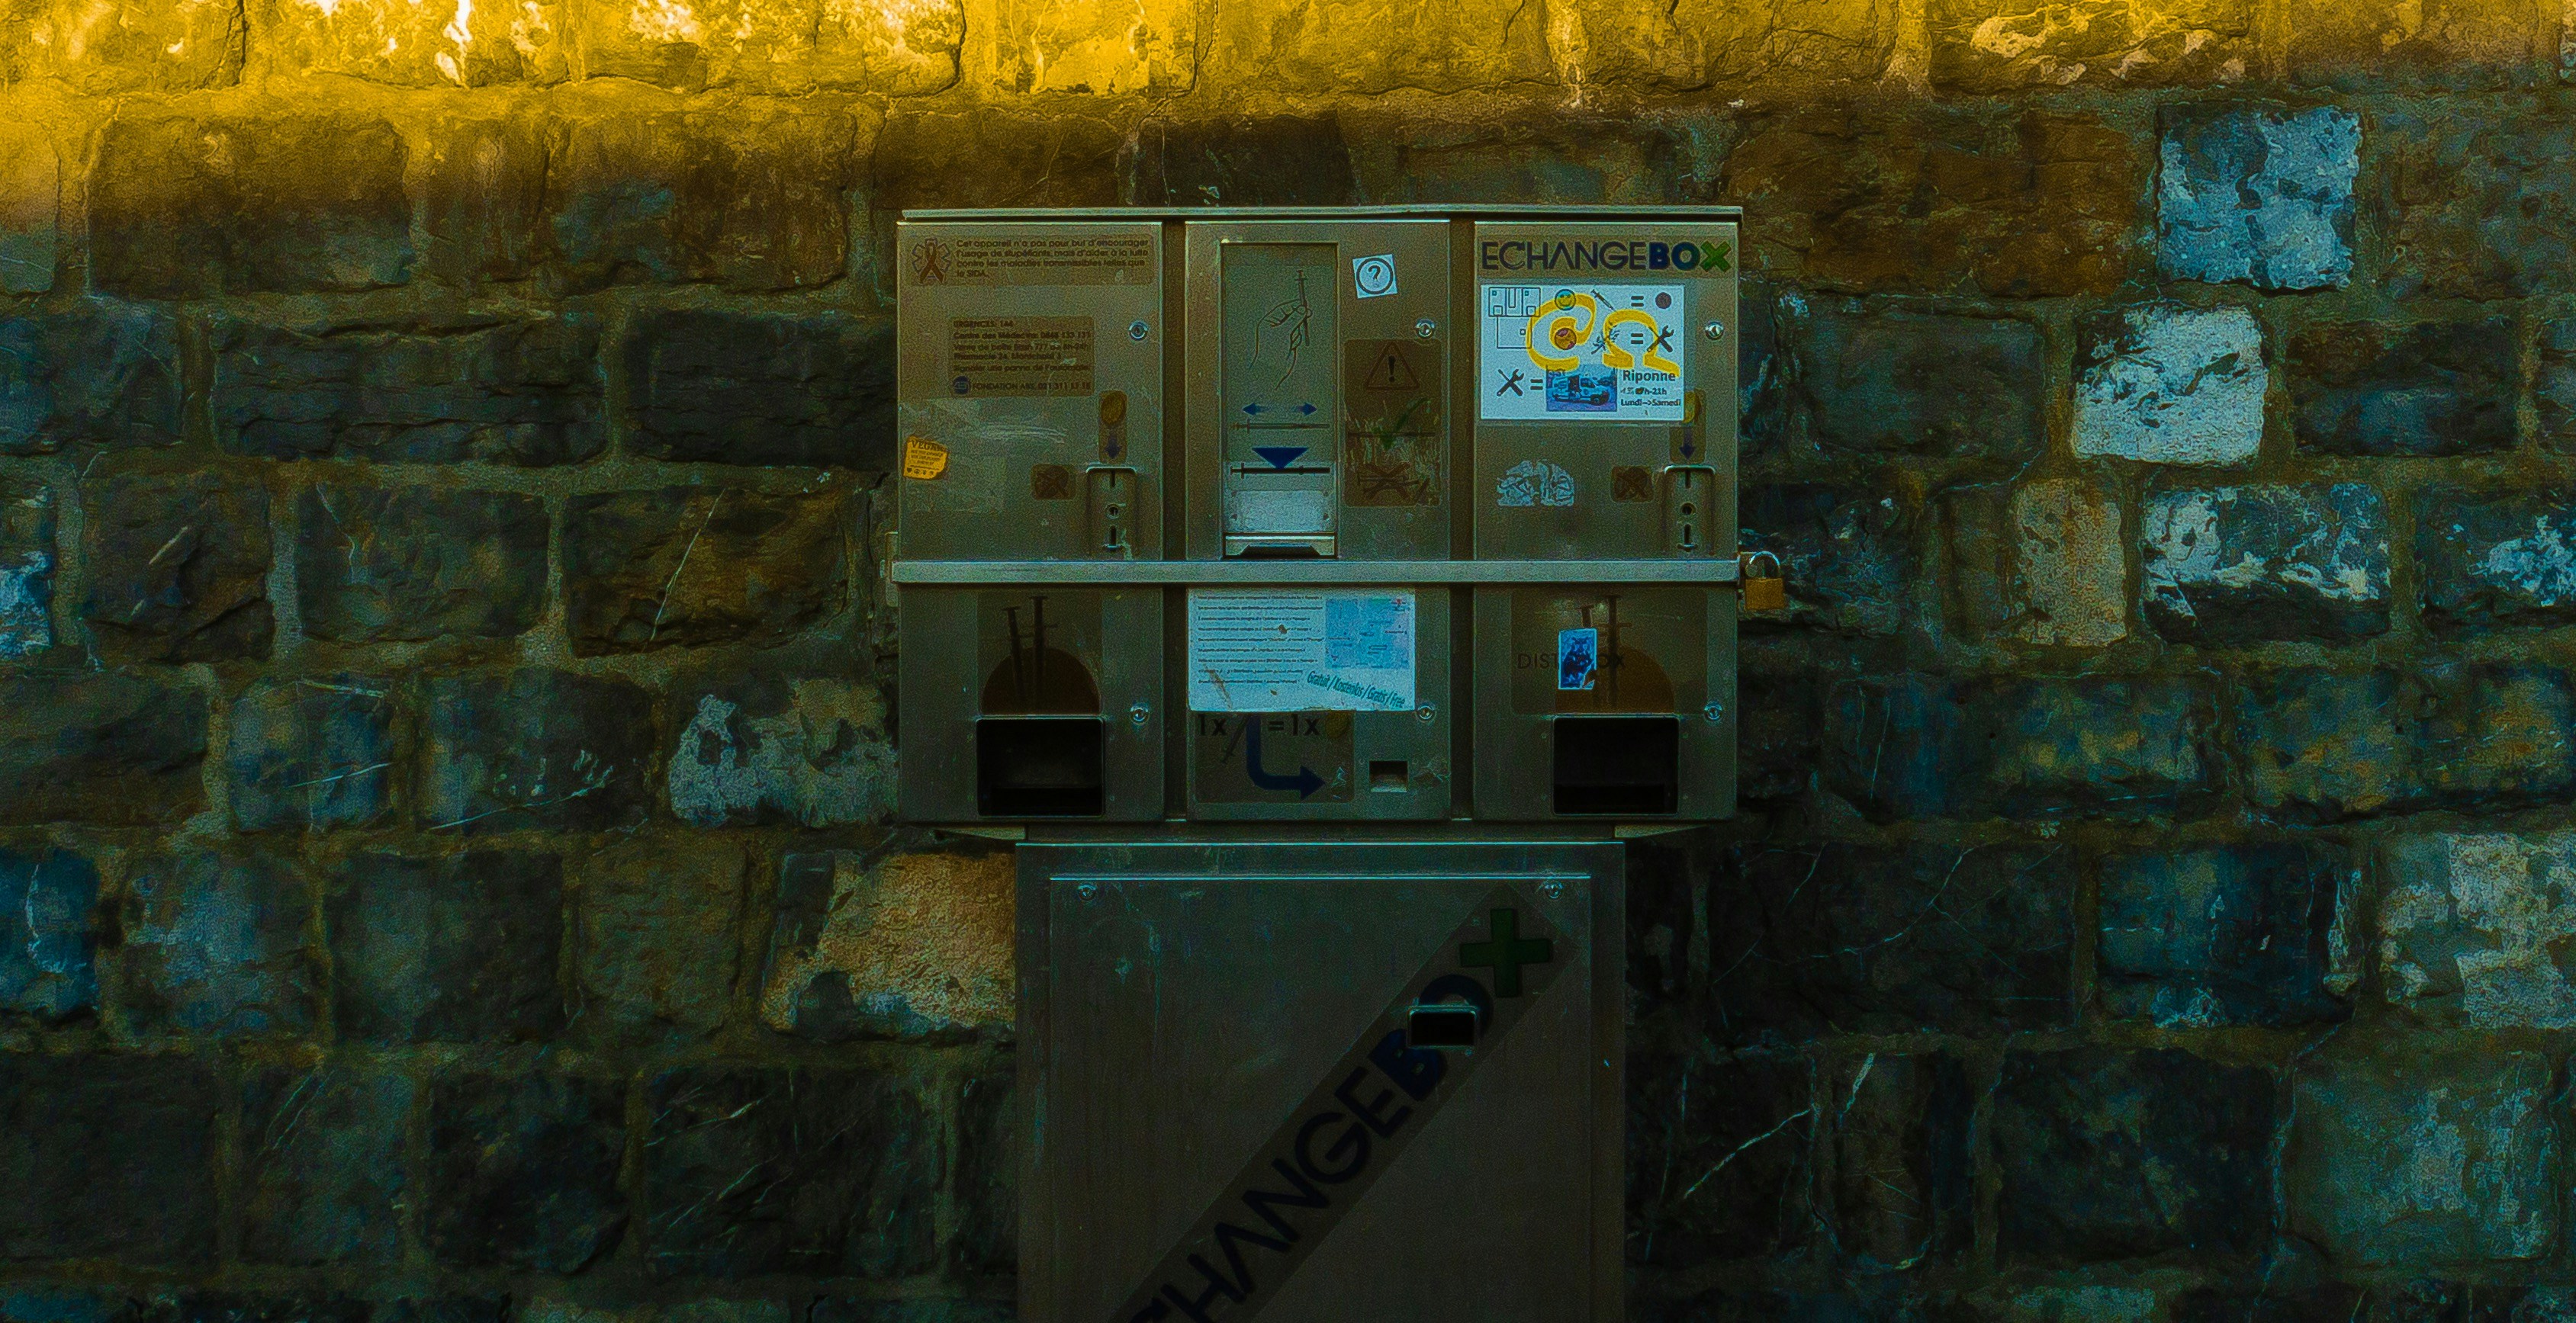 To solve the drug problem in Switzerland, this machine was made to exchange the syringes for new ones. Instead of prohibiting the drug use, the government facilitated it which resulted in a much happier population which dropped the drug use immensely.